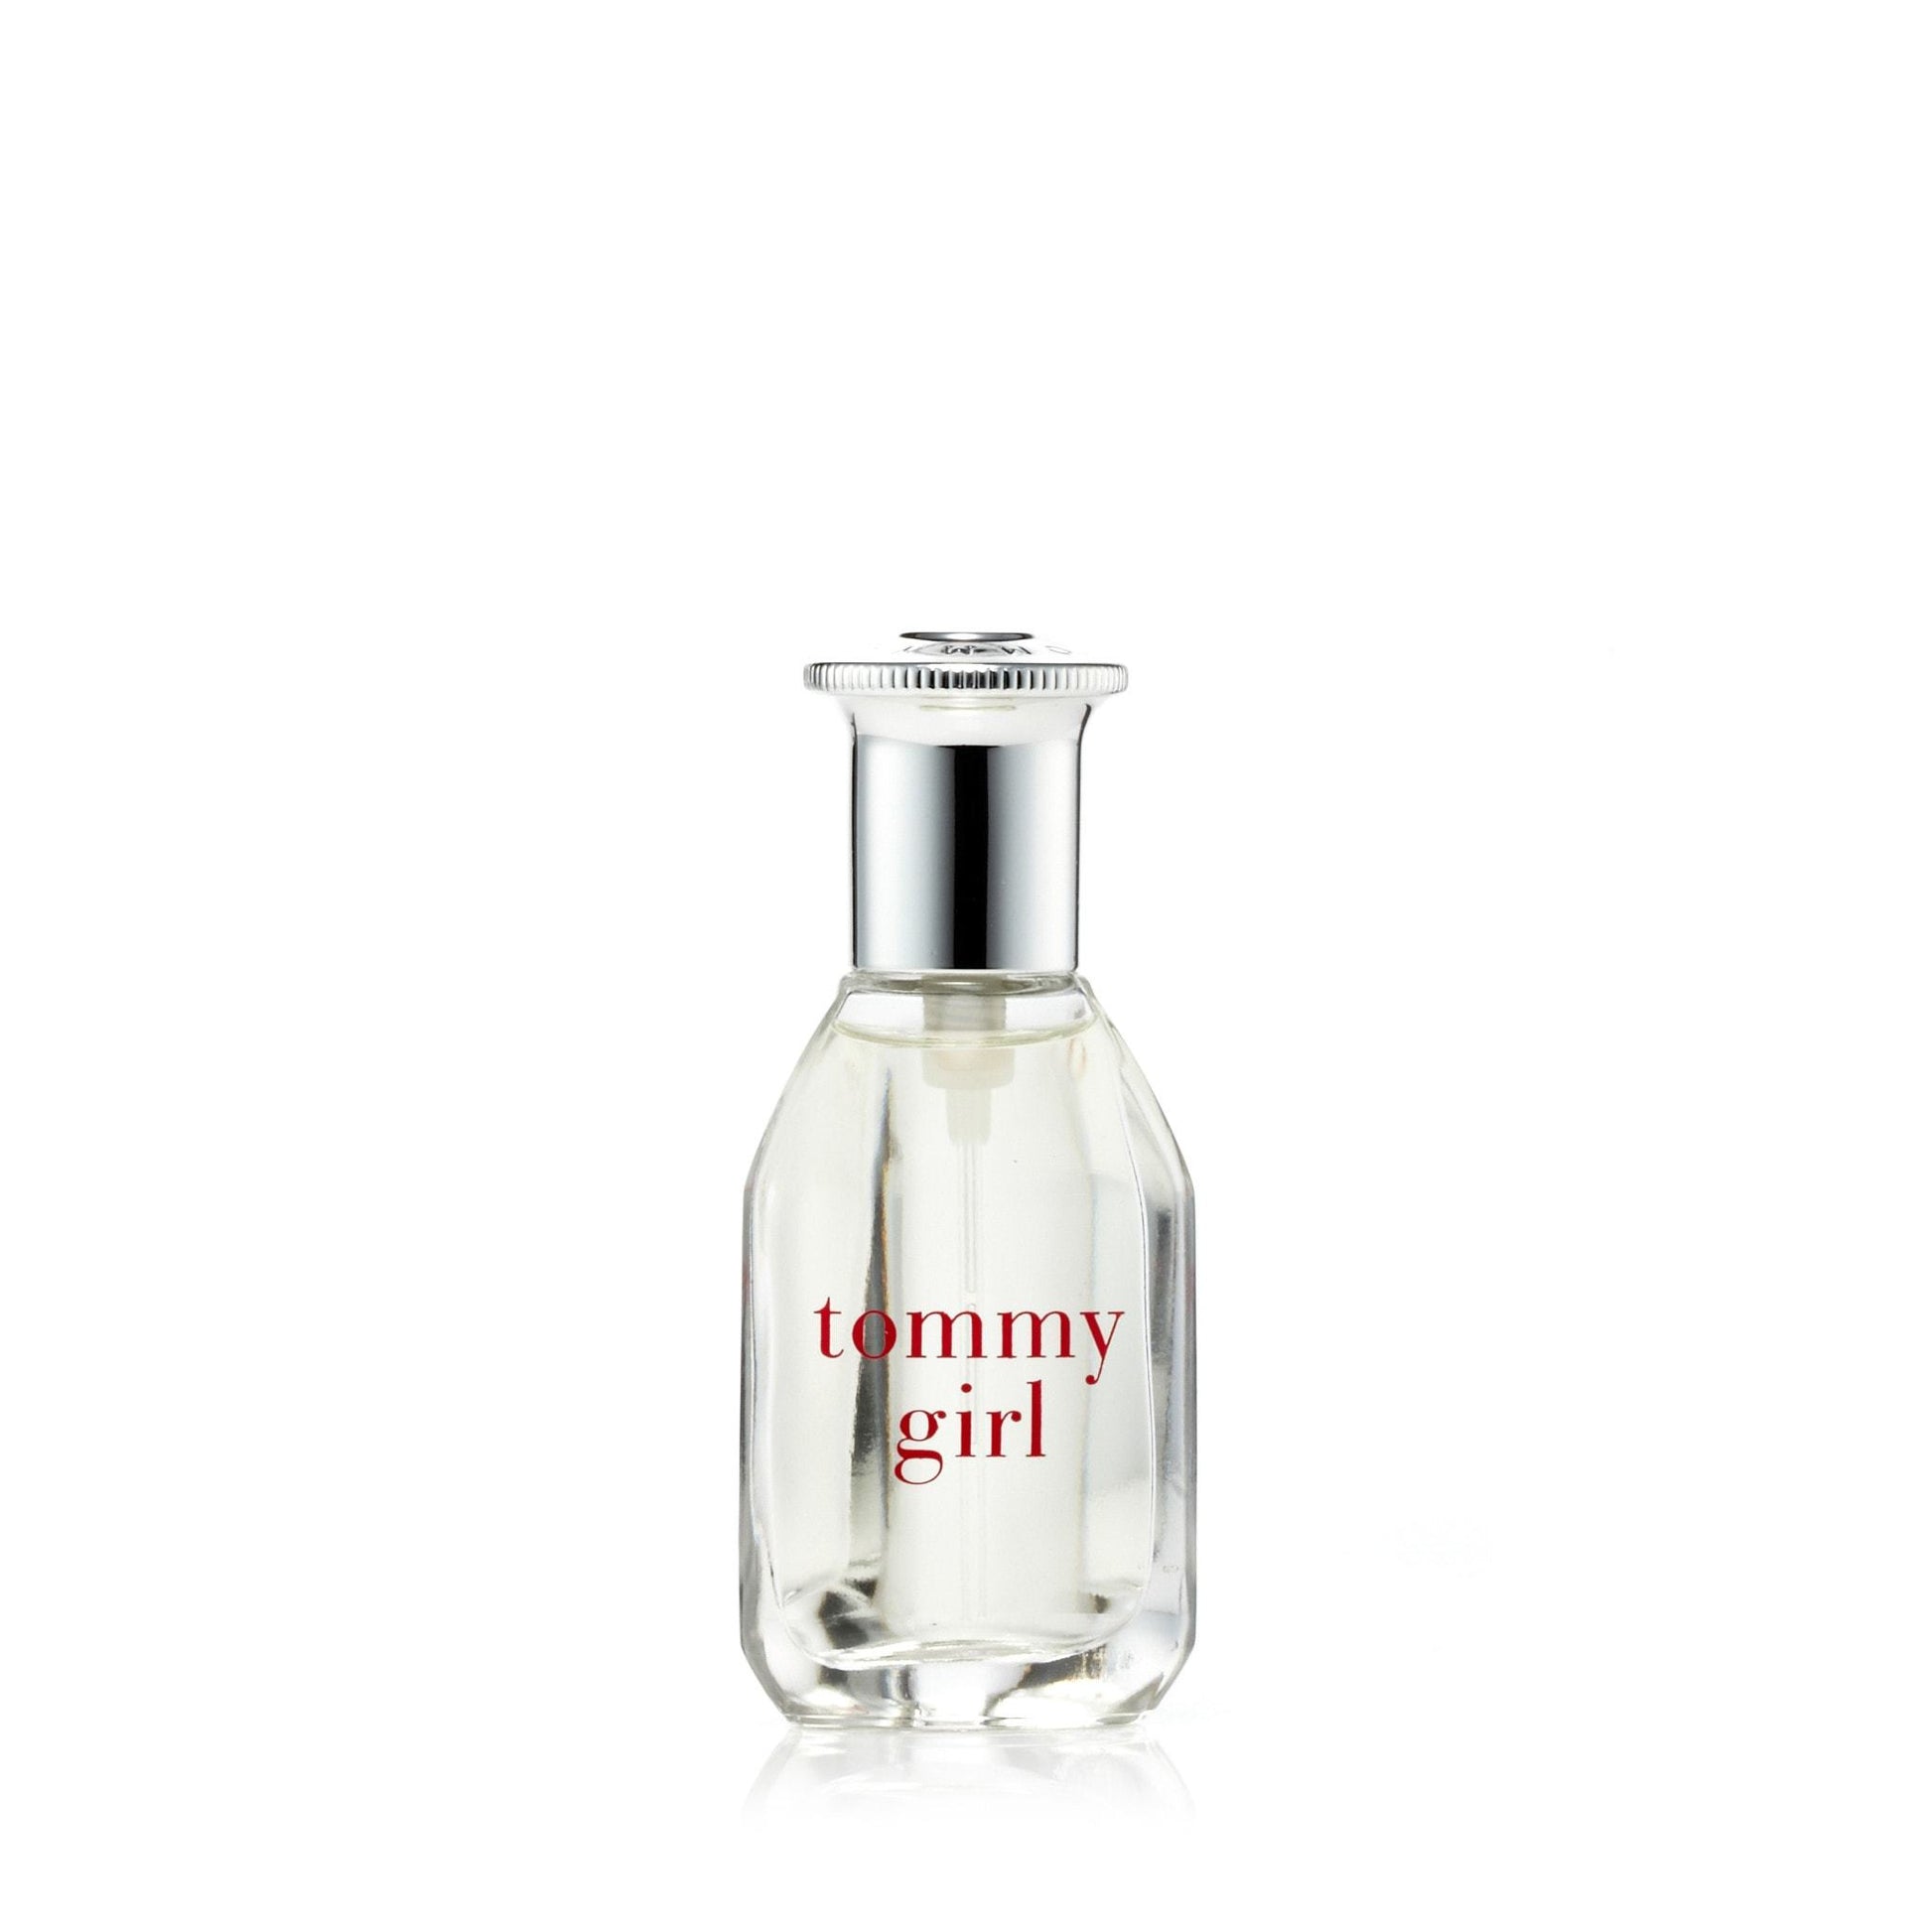 Tommy Girl Eau de Toilette Spray for Women by Tommy Hilfiger, Product image 2